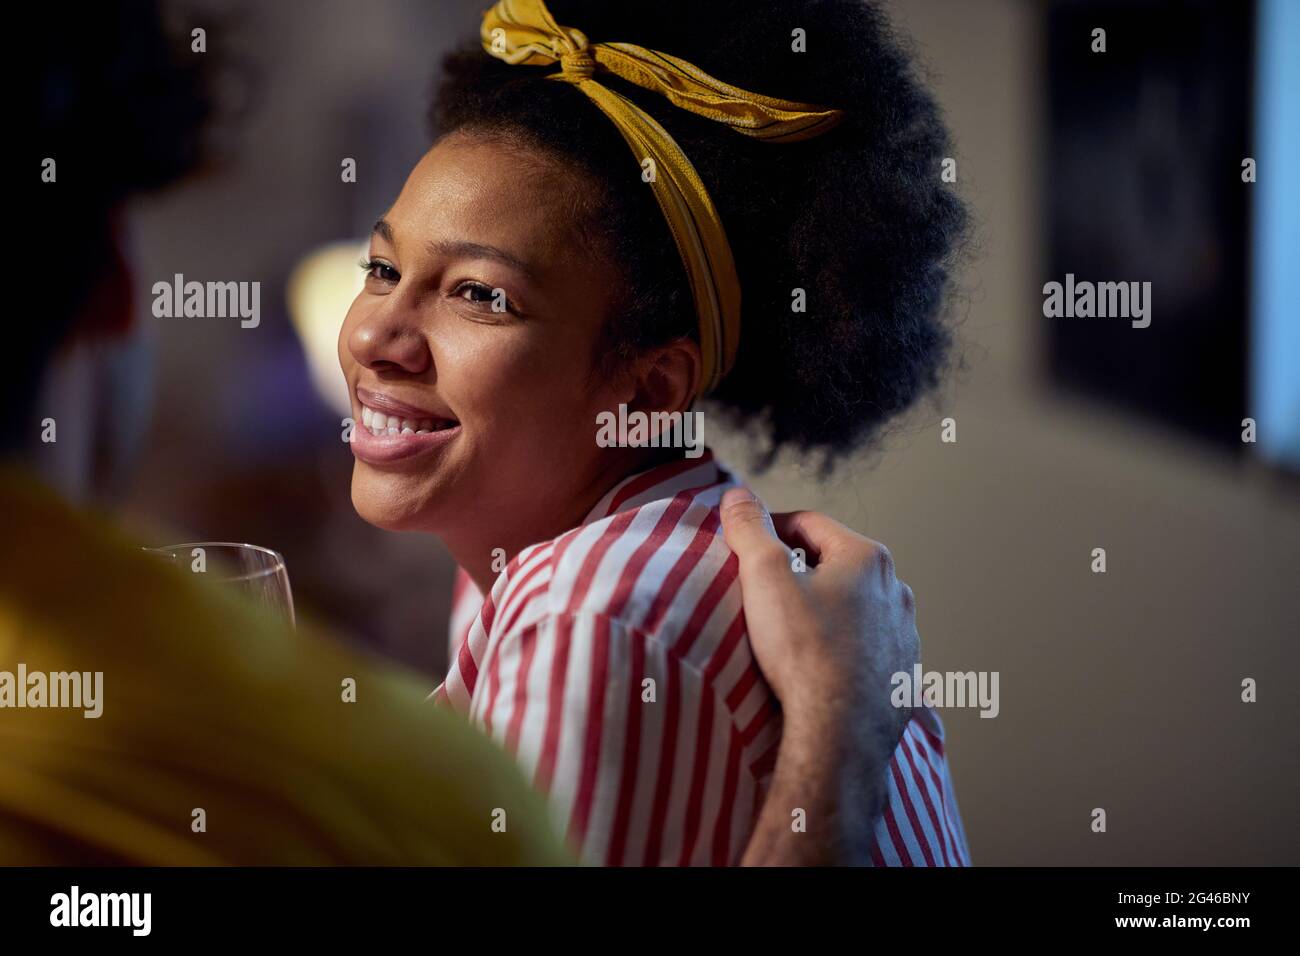 young afro-american female hugged by a caucasian male, enjoying the friendship, looking at him Stock Photo